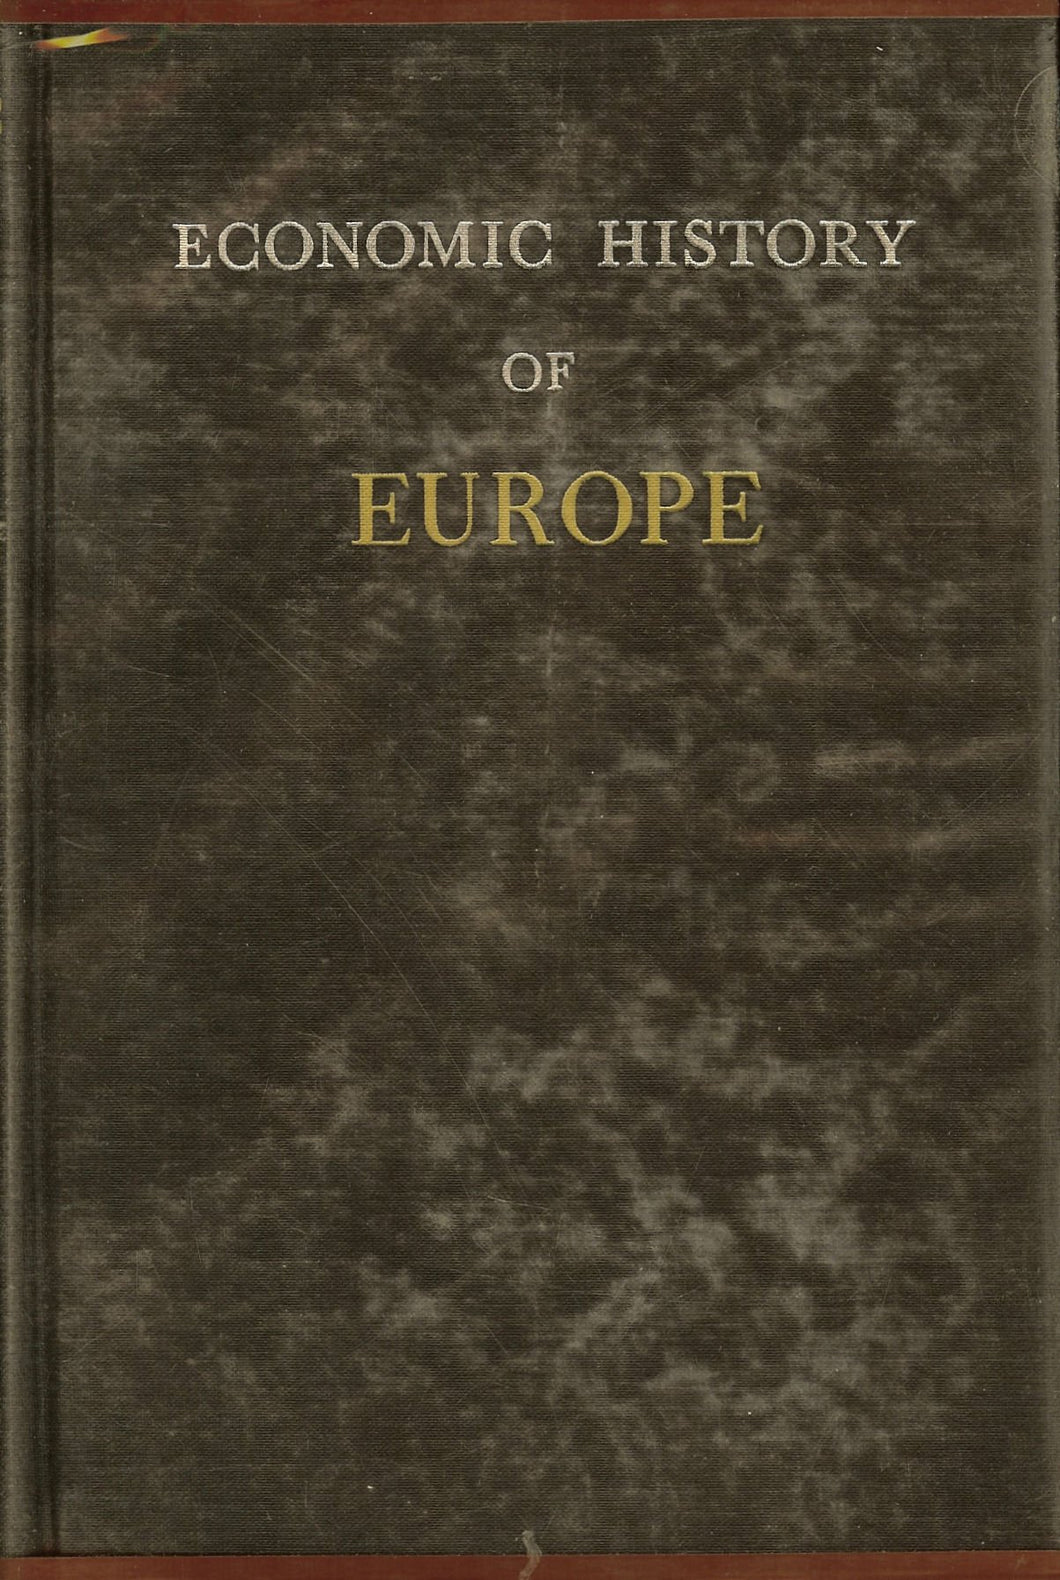 Economic History of Europe Clough, Shepard B. and Cole, Charles Woolsey